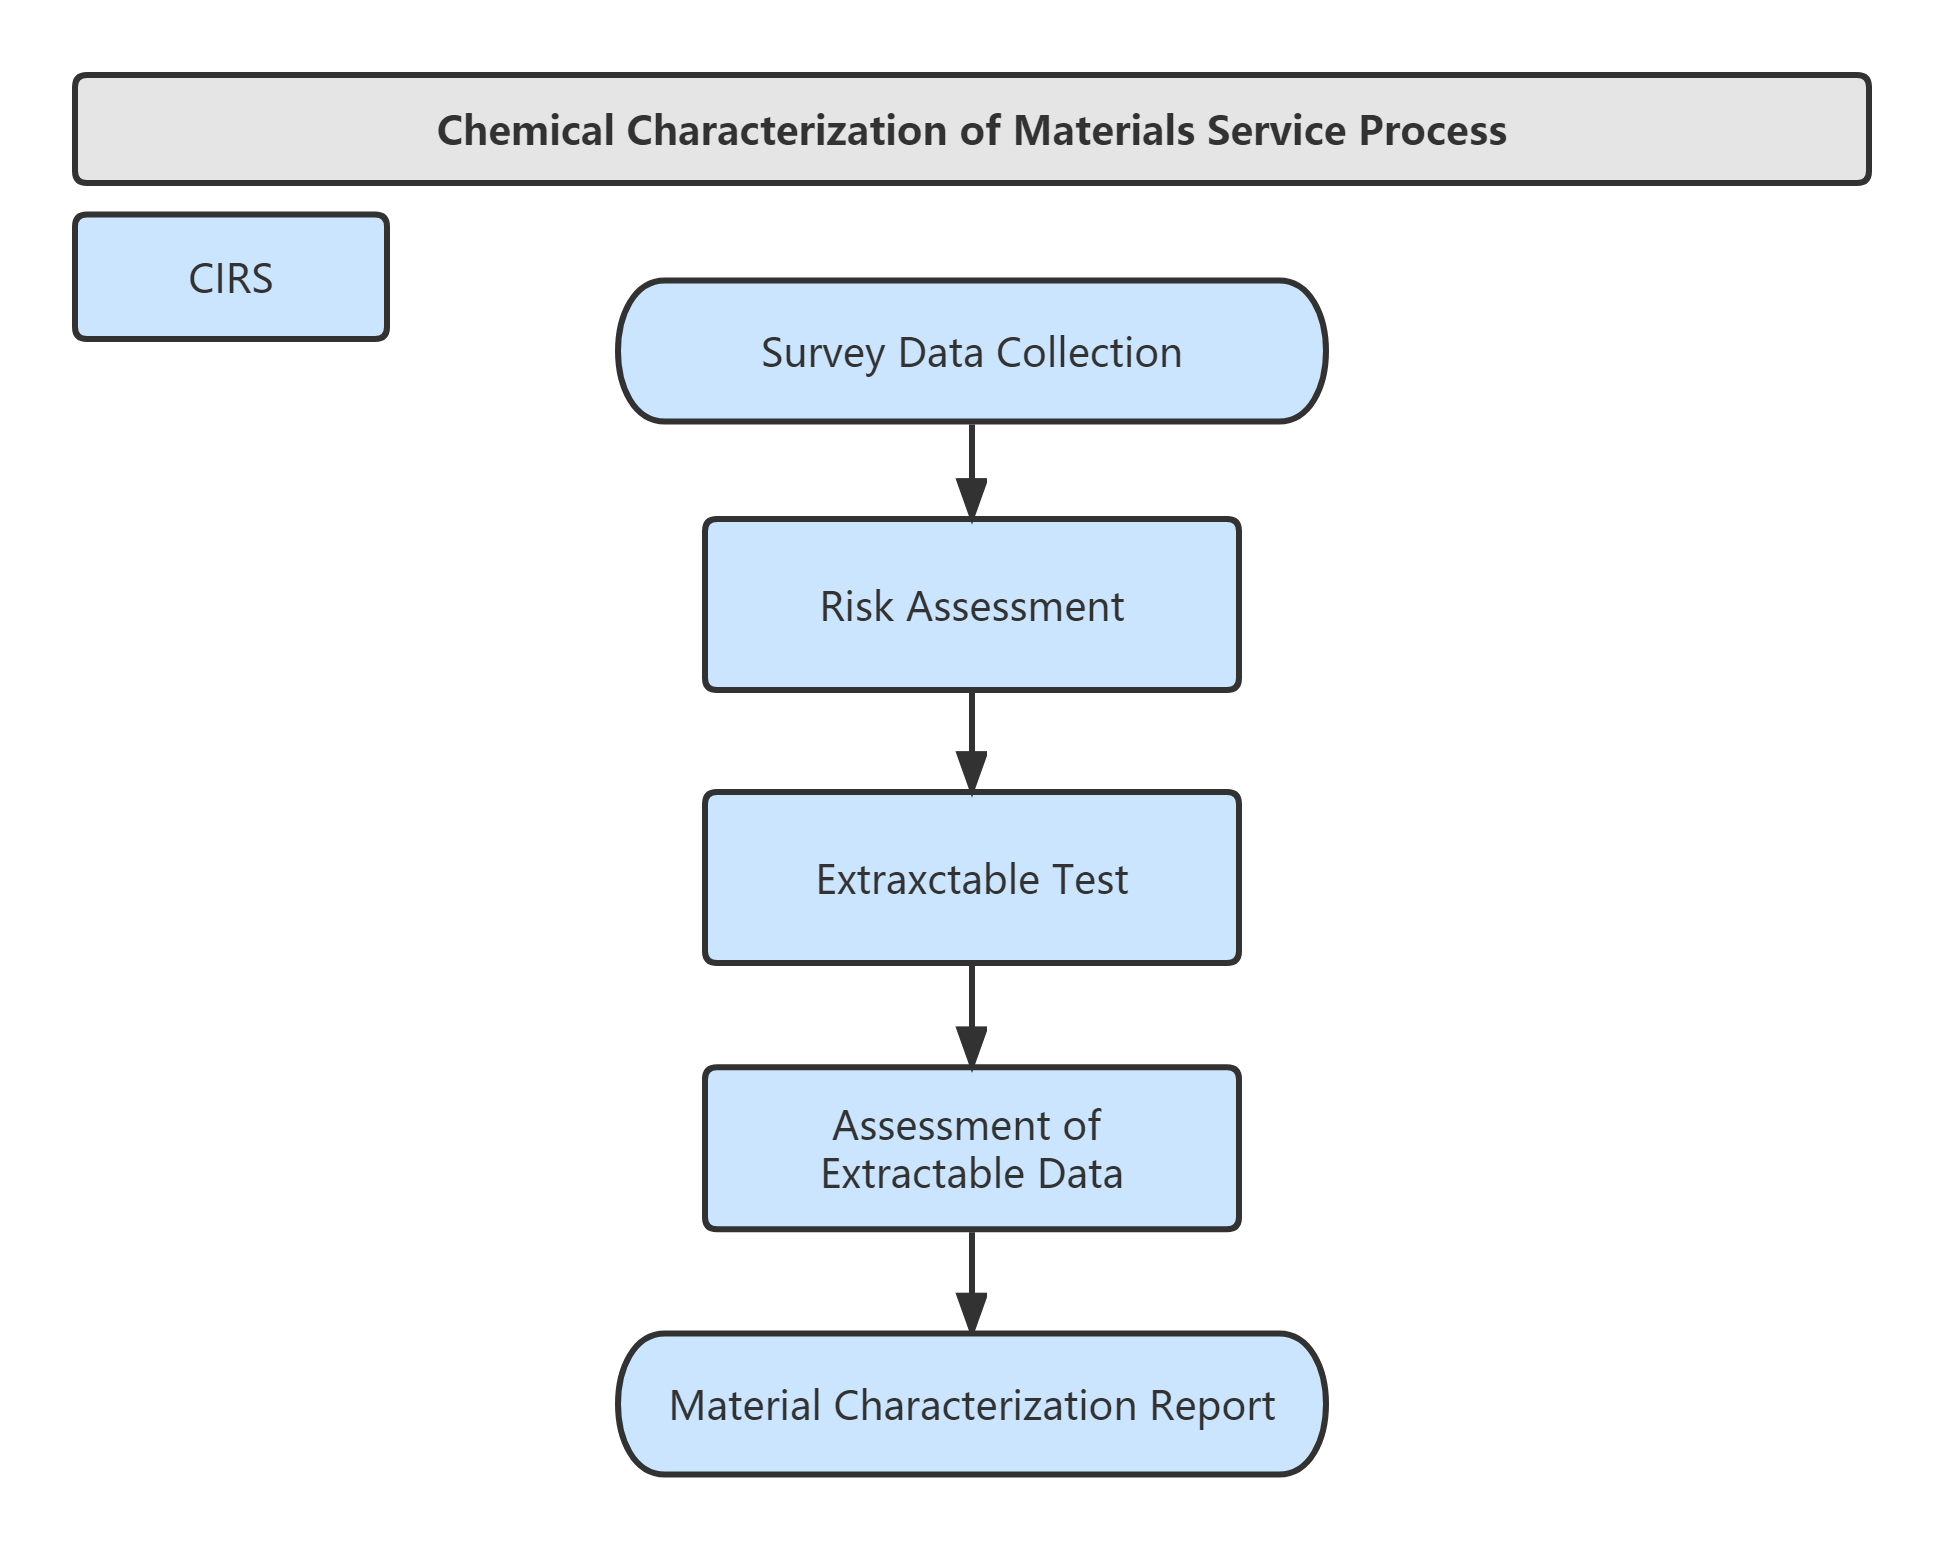 Medical,Device,Chemical,Characterization,Material